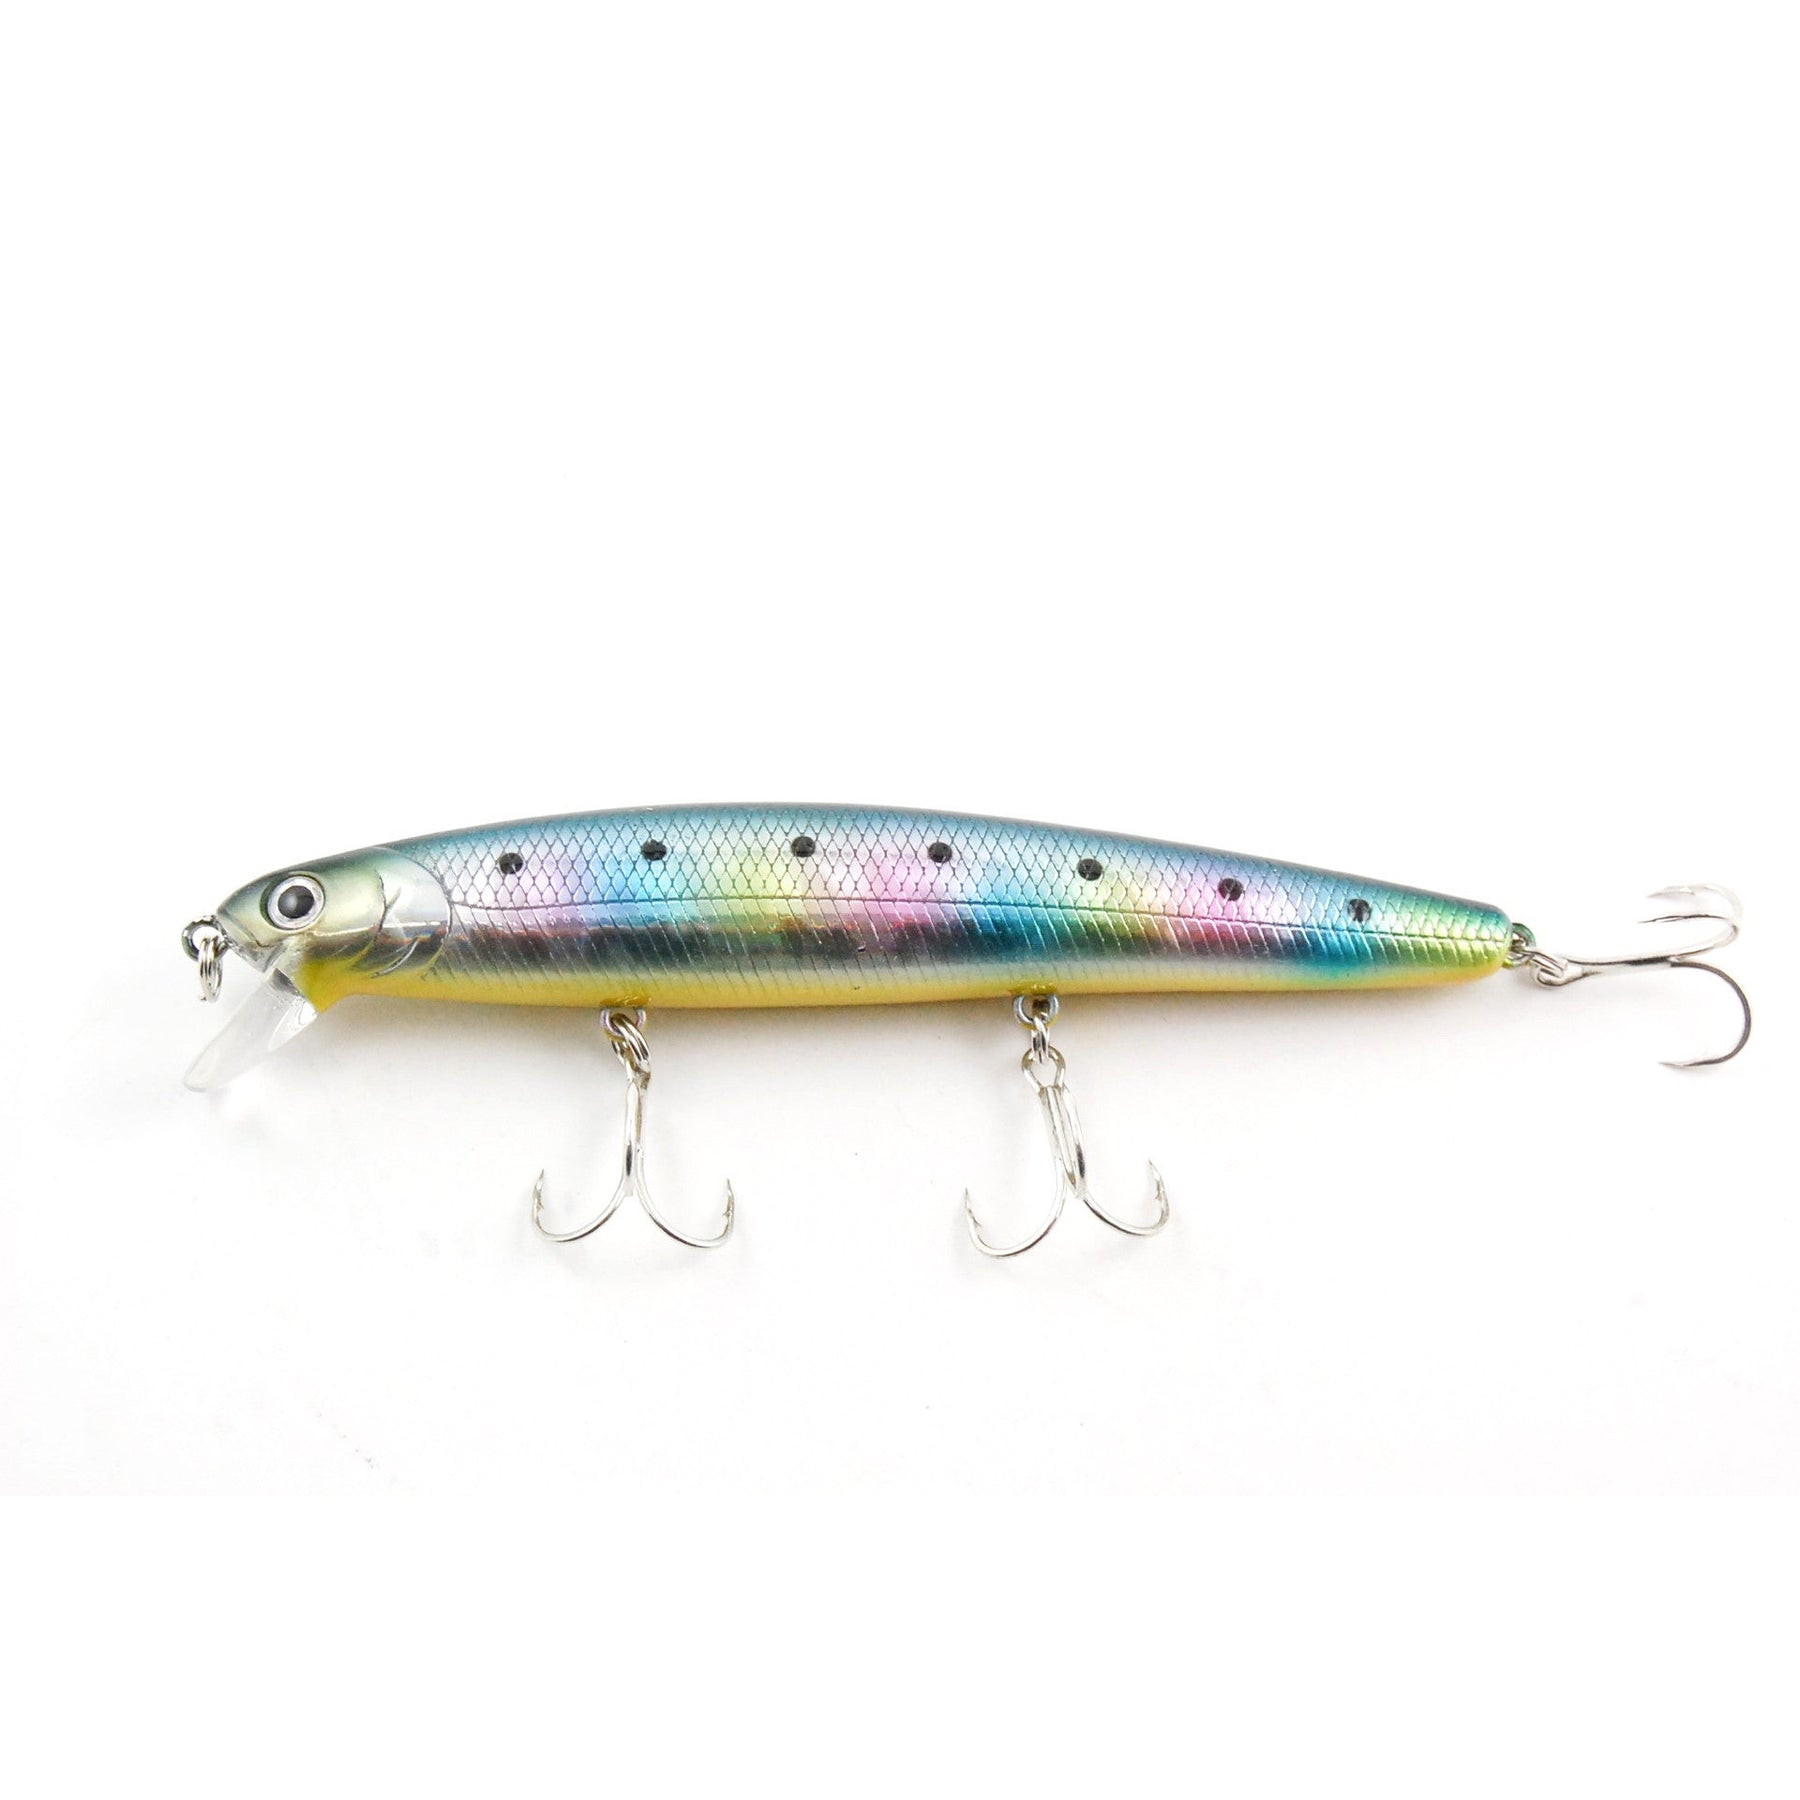 Rainbow-colored, LUCKY CRAFT SKT S.K.T 110 MAG MR Fishing Lure #AS95   #BassLure #Lure #LUCKYCRAFT  #SKTS.K.T110MAGMR